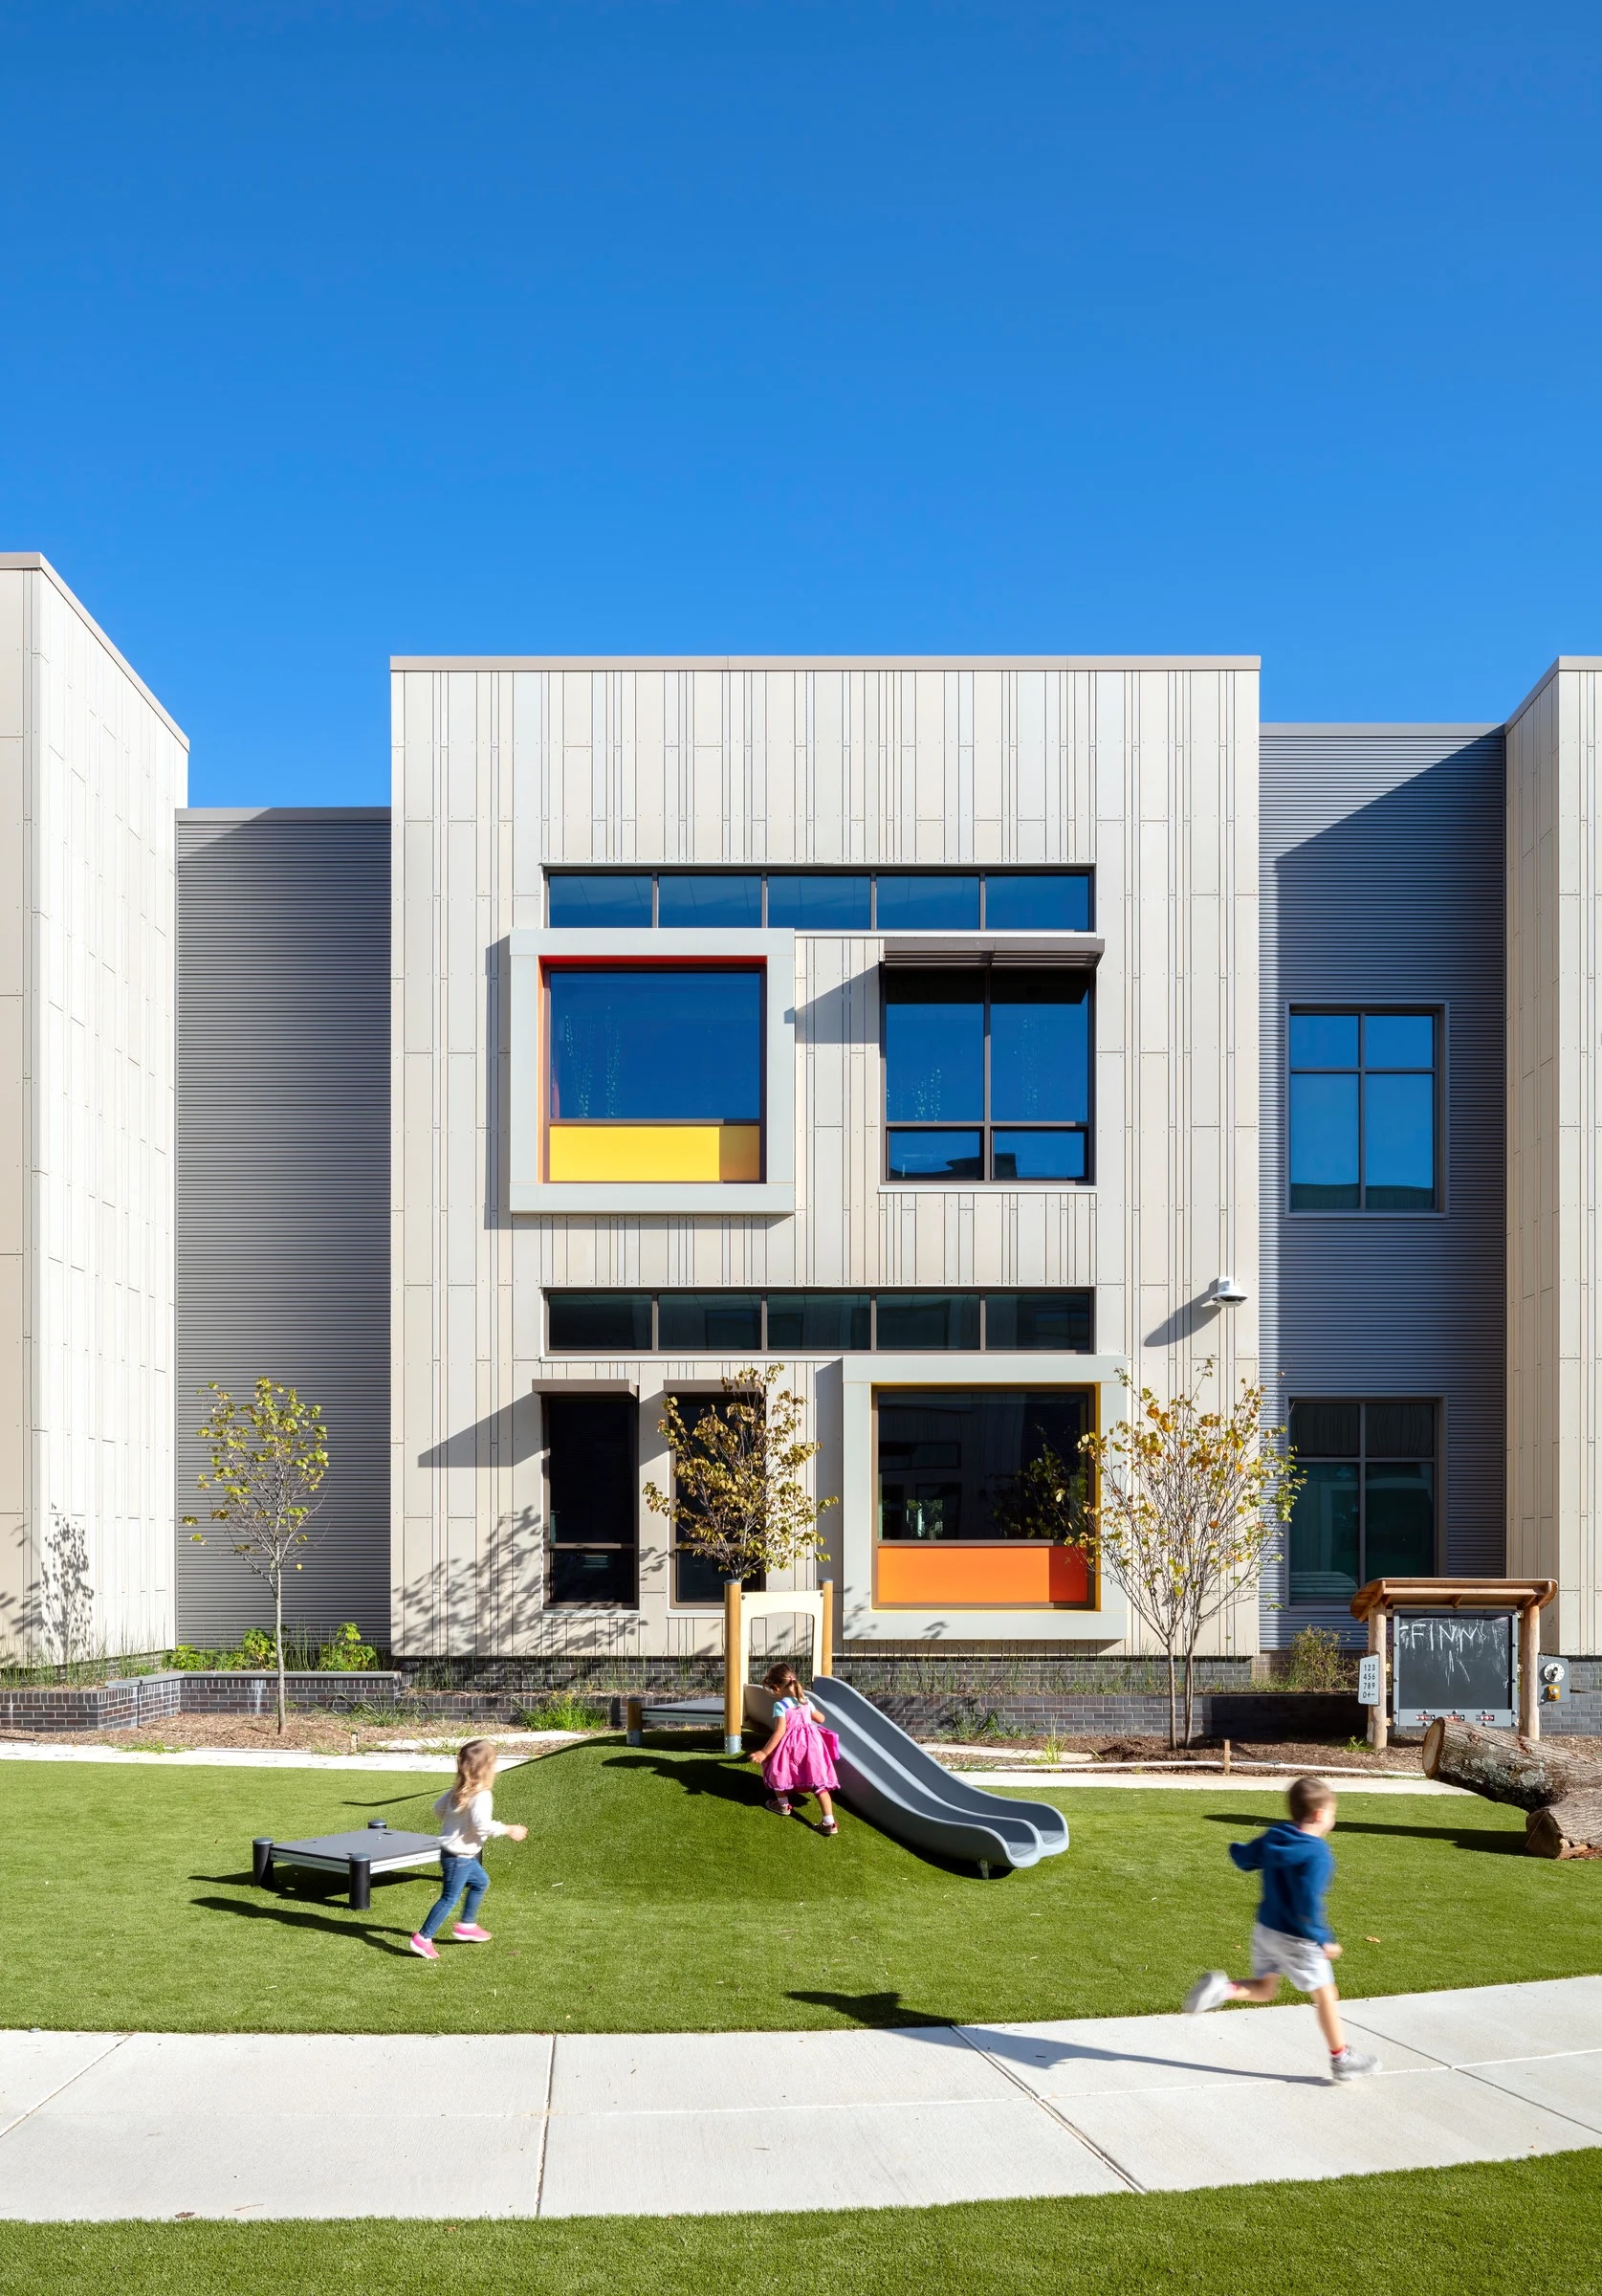 World's first K-12 school to achieve both LEED for Schools Platinum and WELL Platinum